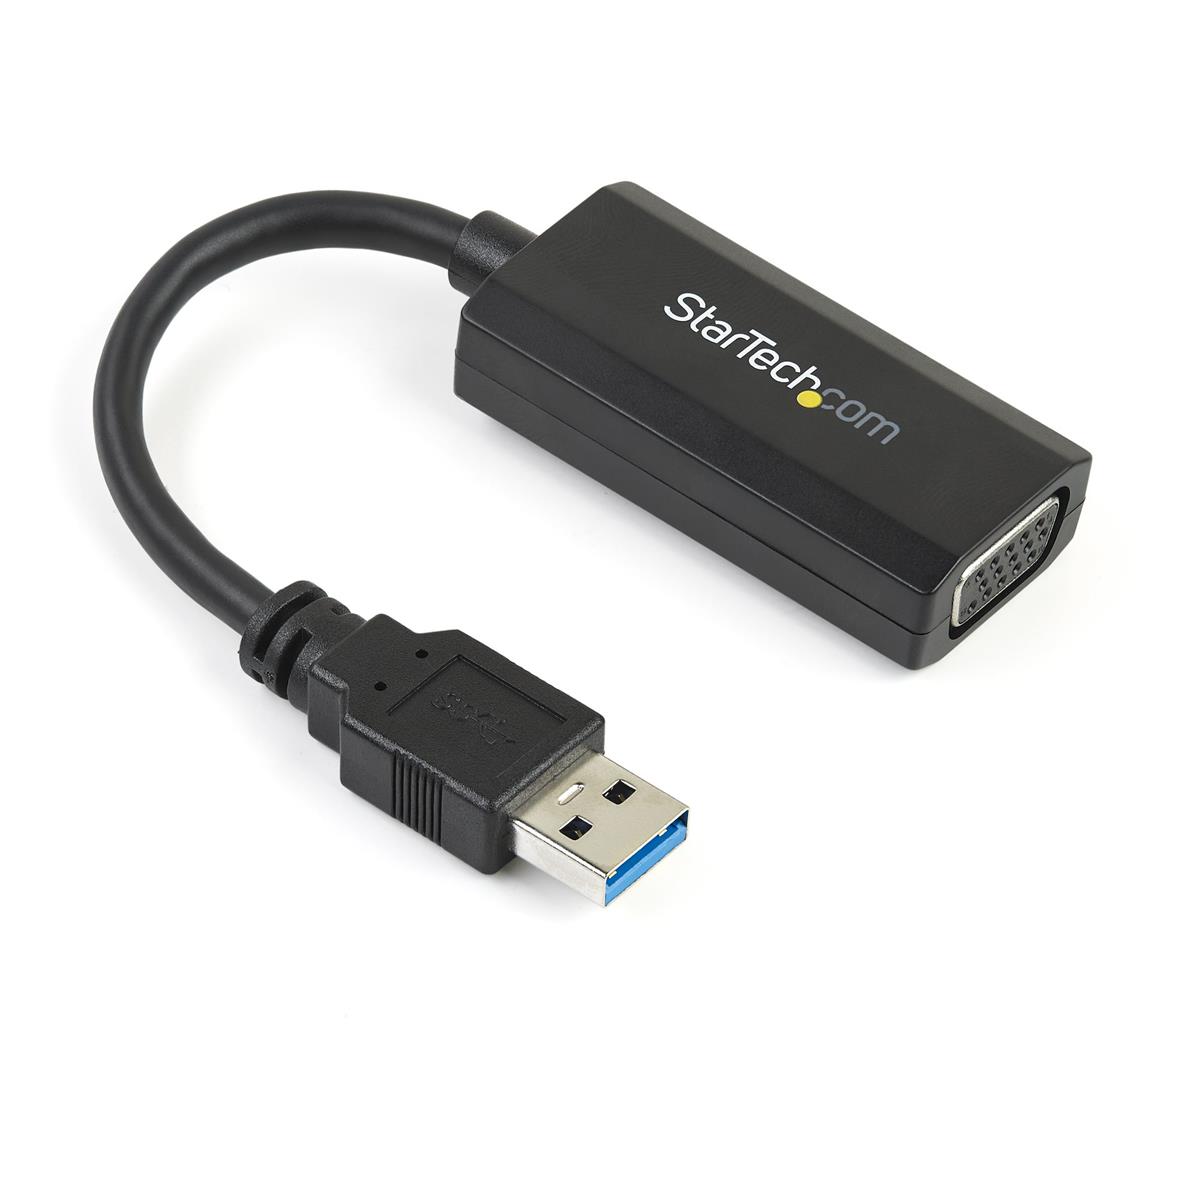 Image of StarTech USB 3.0 to VGA Video Adapter with On Board Driver